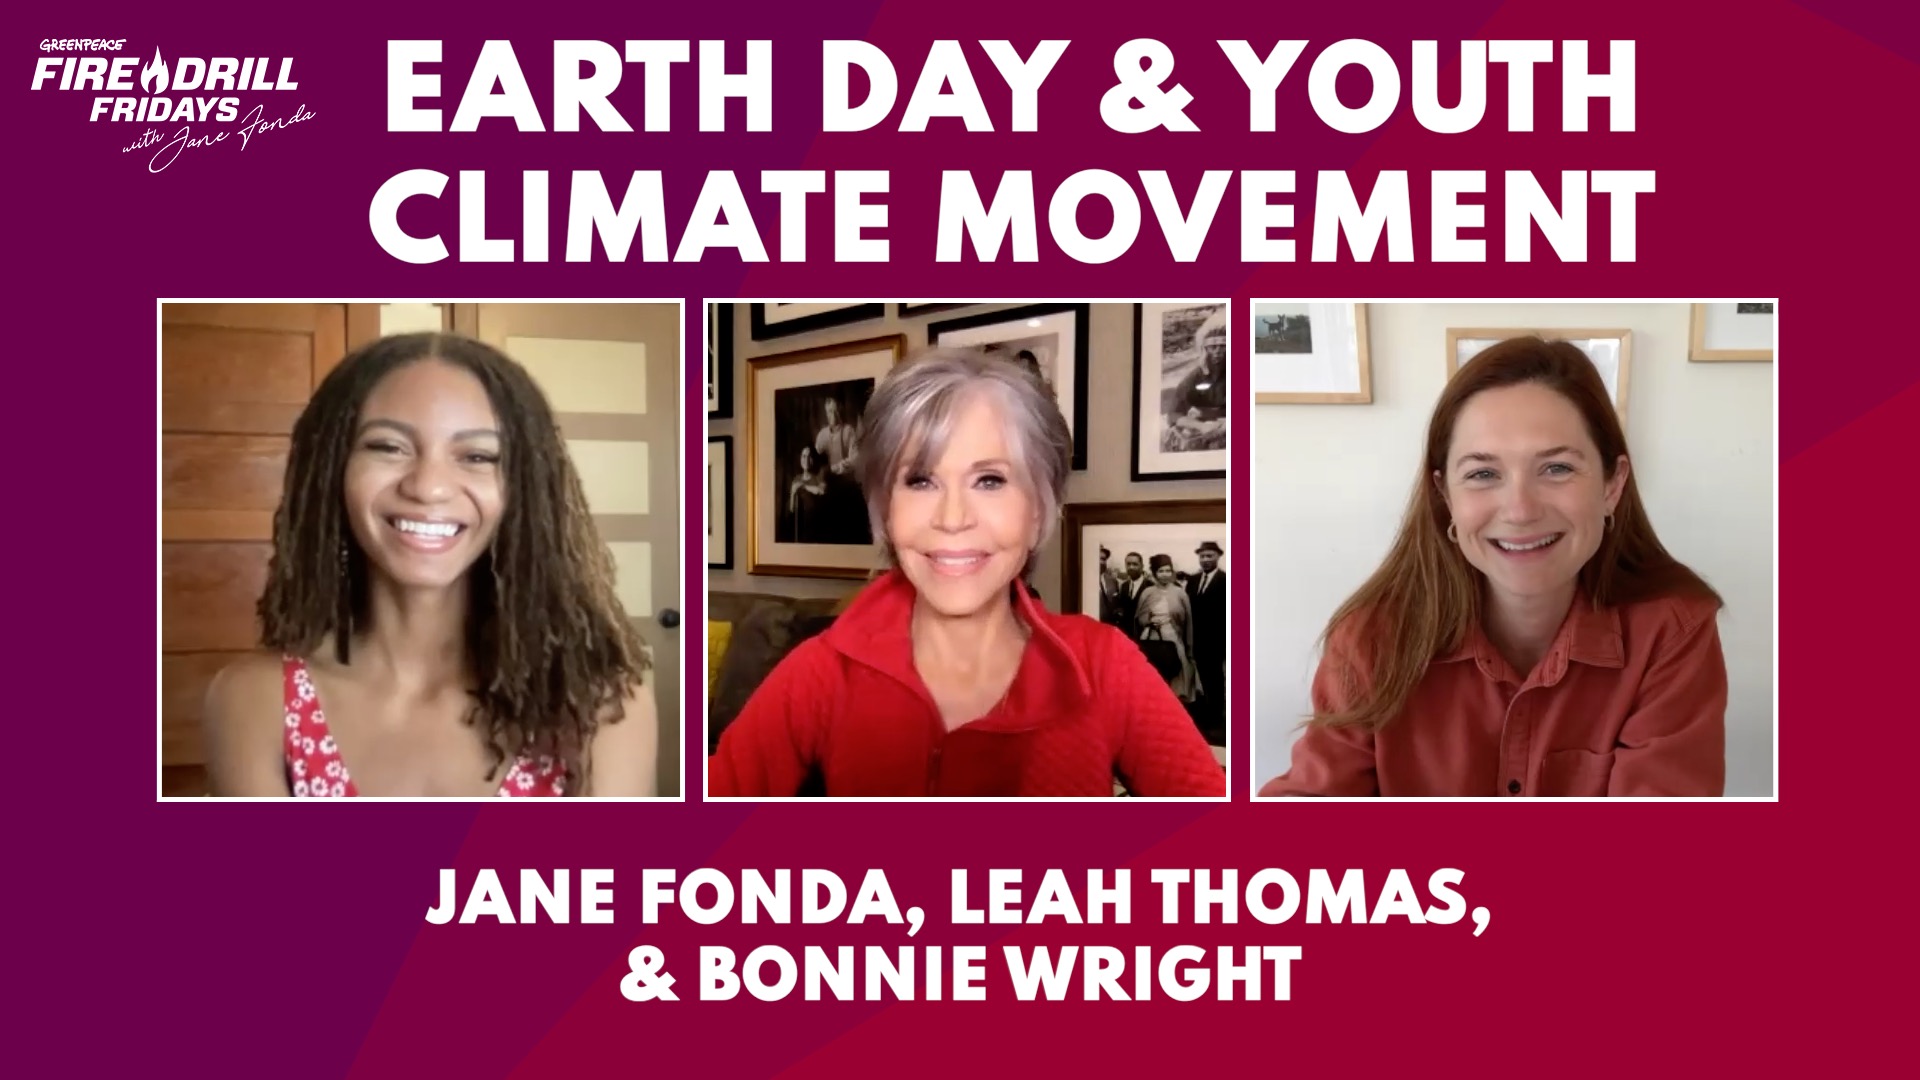 Watch Bonnie Wright & Leah Thomas Discuss What Earth Day Means to Them